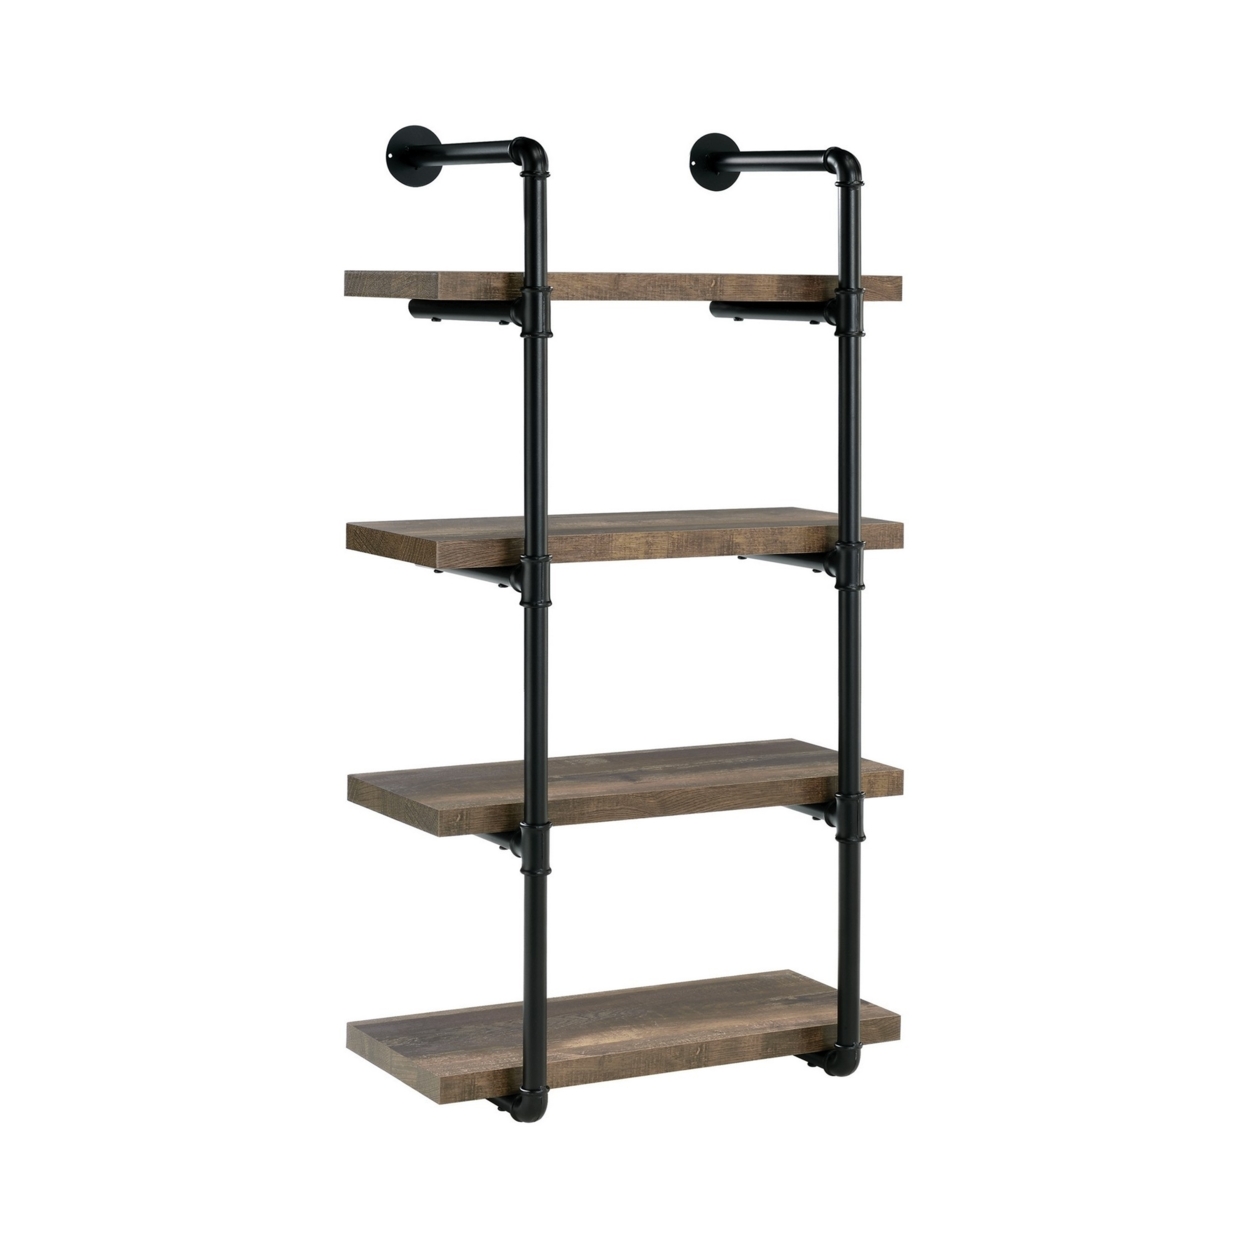 Wall Shelf With 4 Shelves And Piped Metal Frame, Brown And Black- Saltoro Sherpi